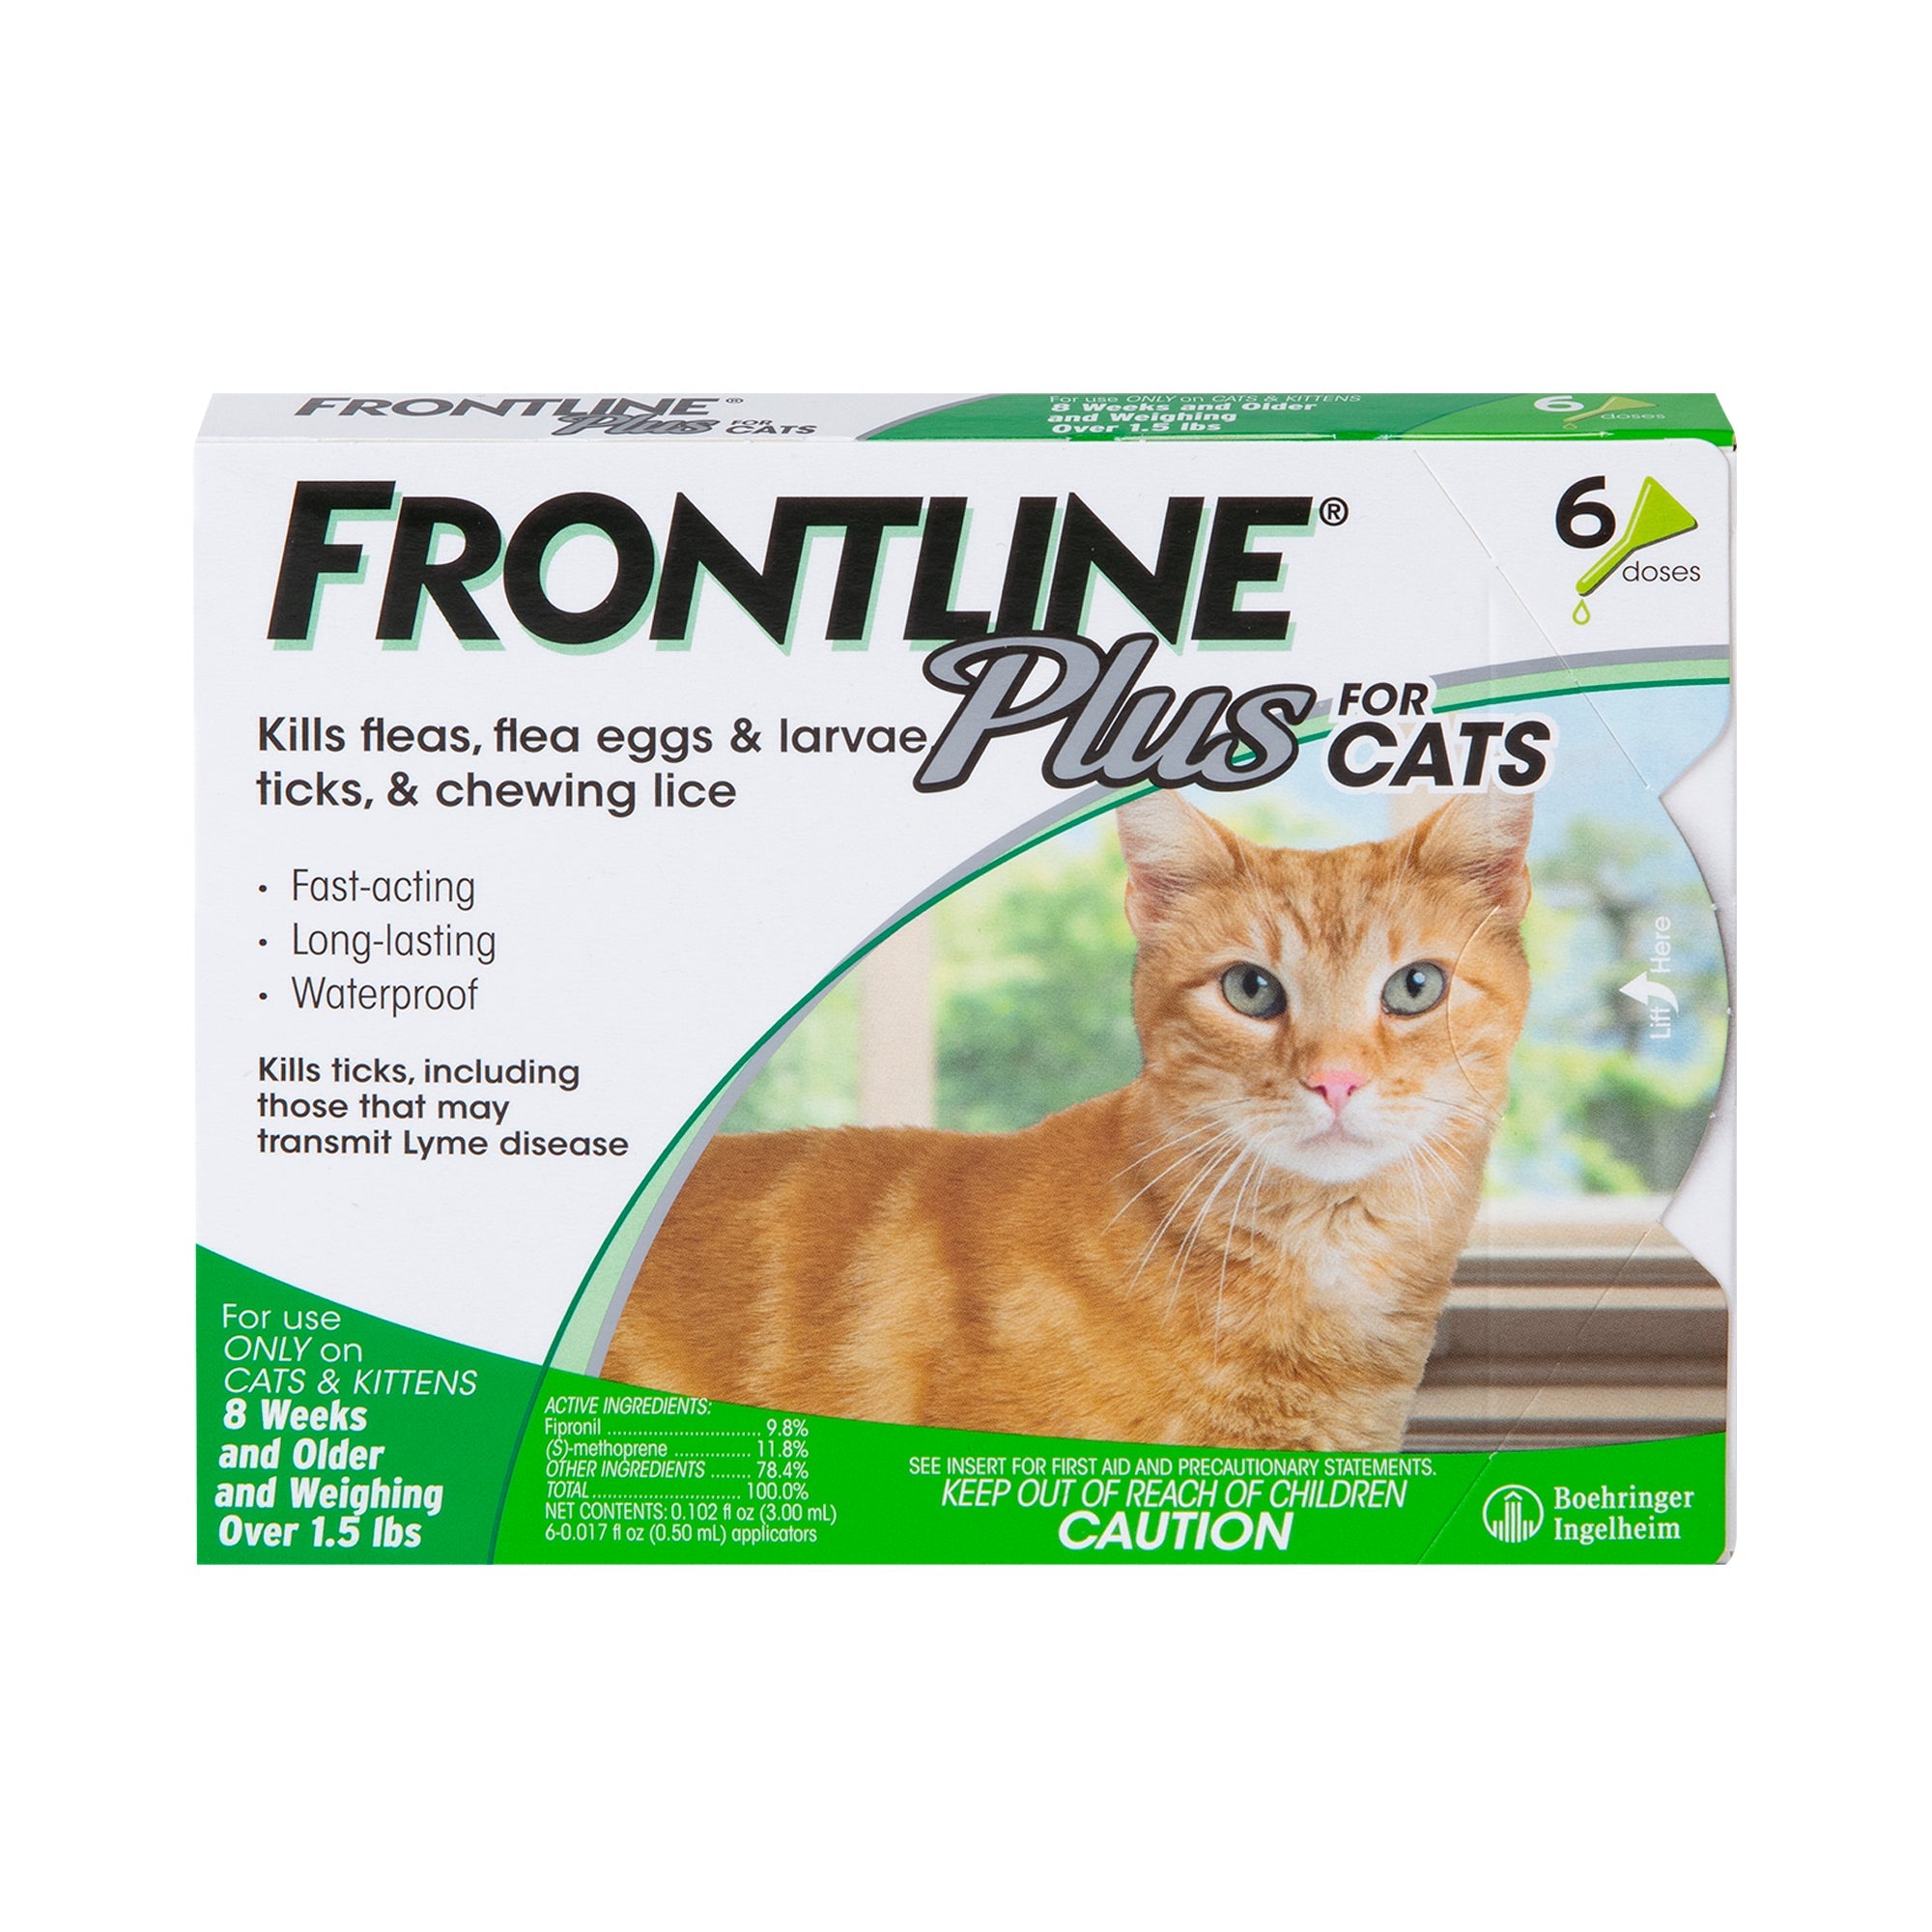 FRONTLINE Plus for Cats and Kittens (1.5 lbs and over) Flea and Tick Treatment, 6 Doses